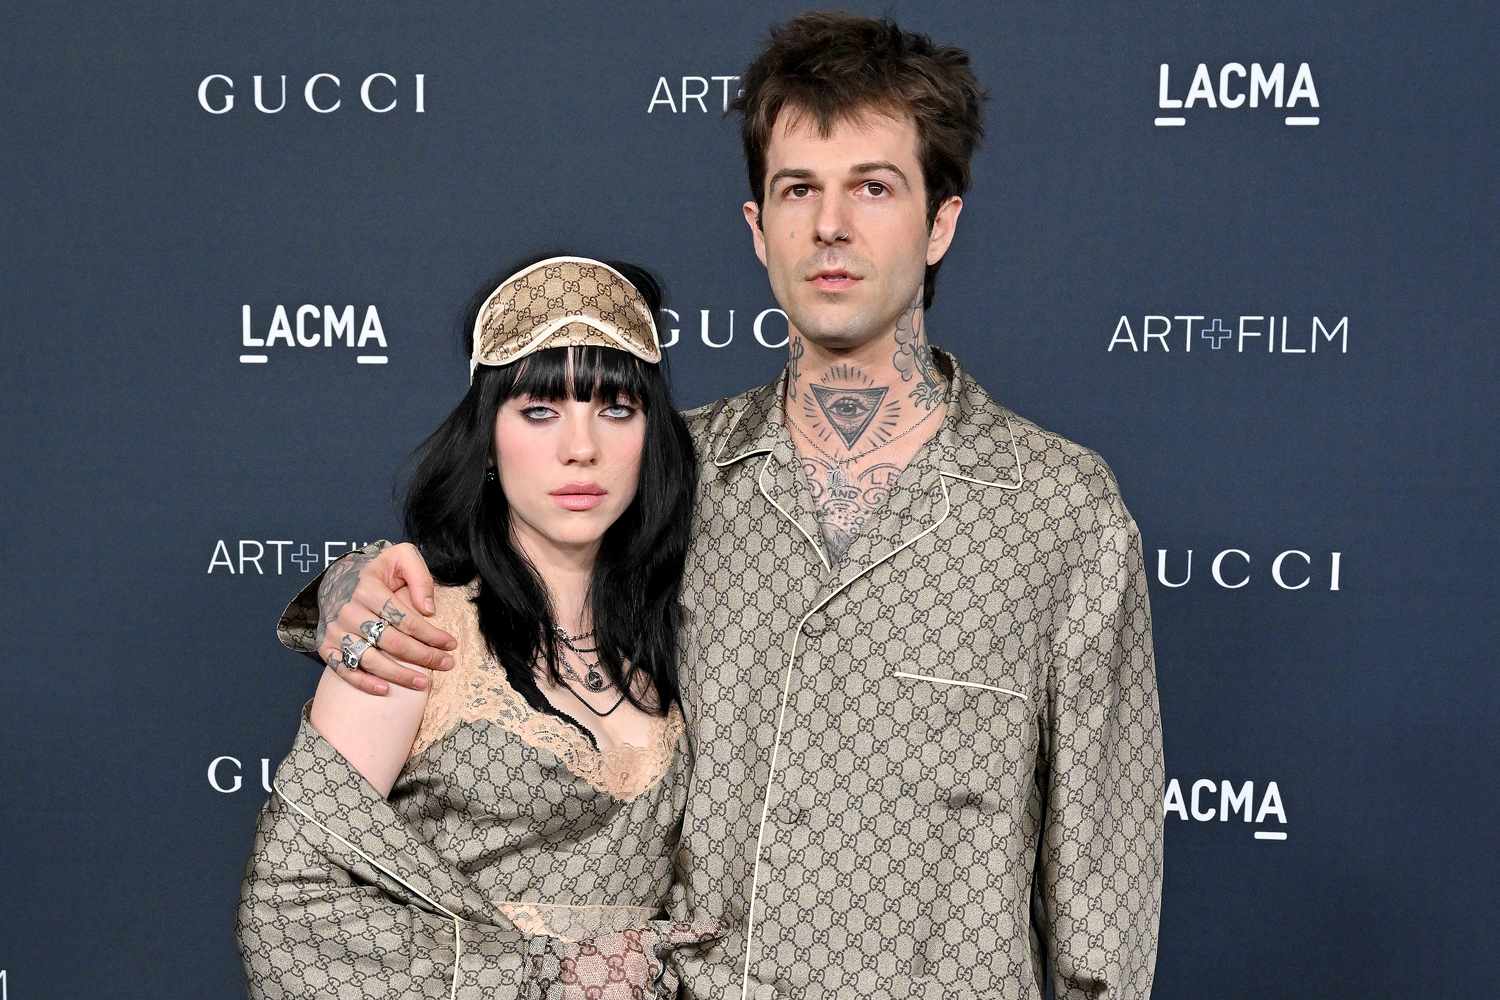 Billie Eilish and Jesse Rutherford making their red carpet debut in head to toe Gucci